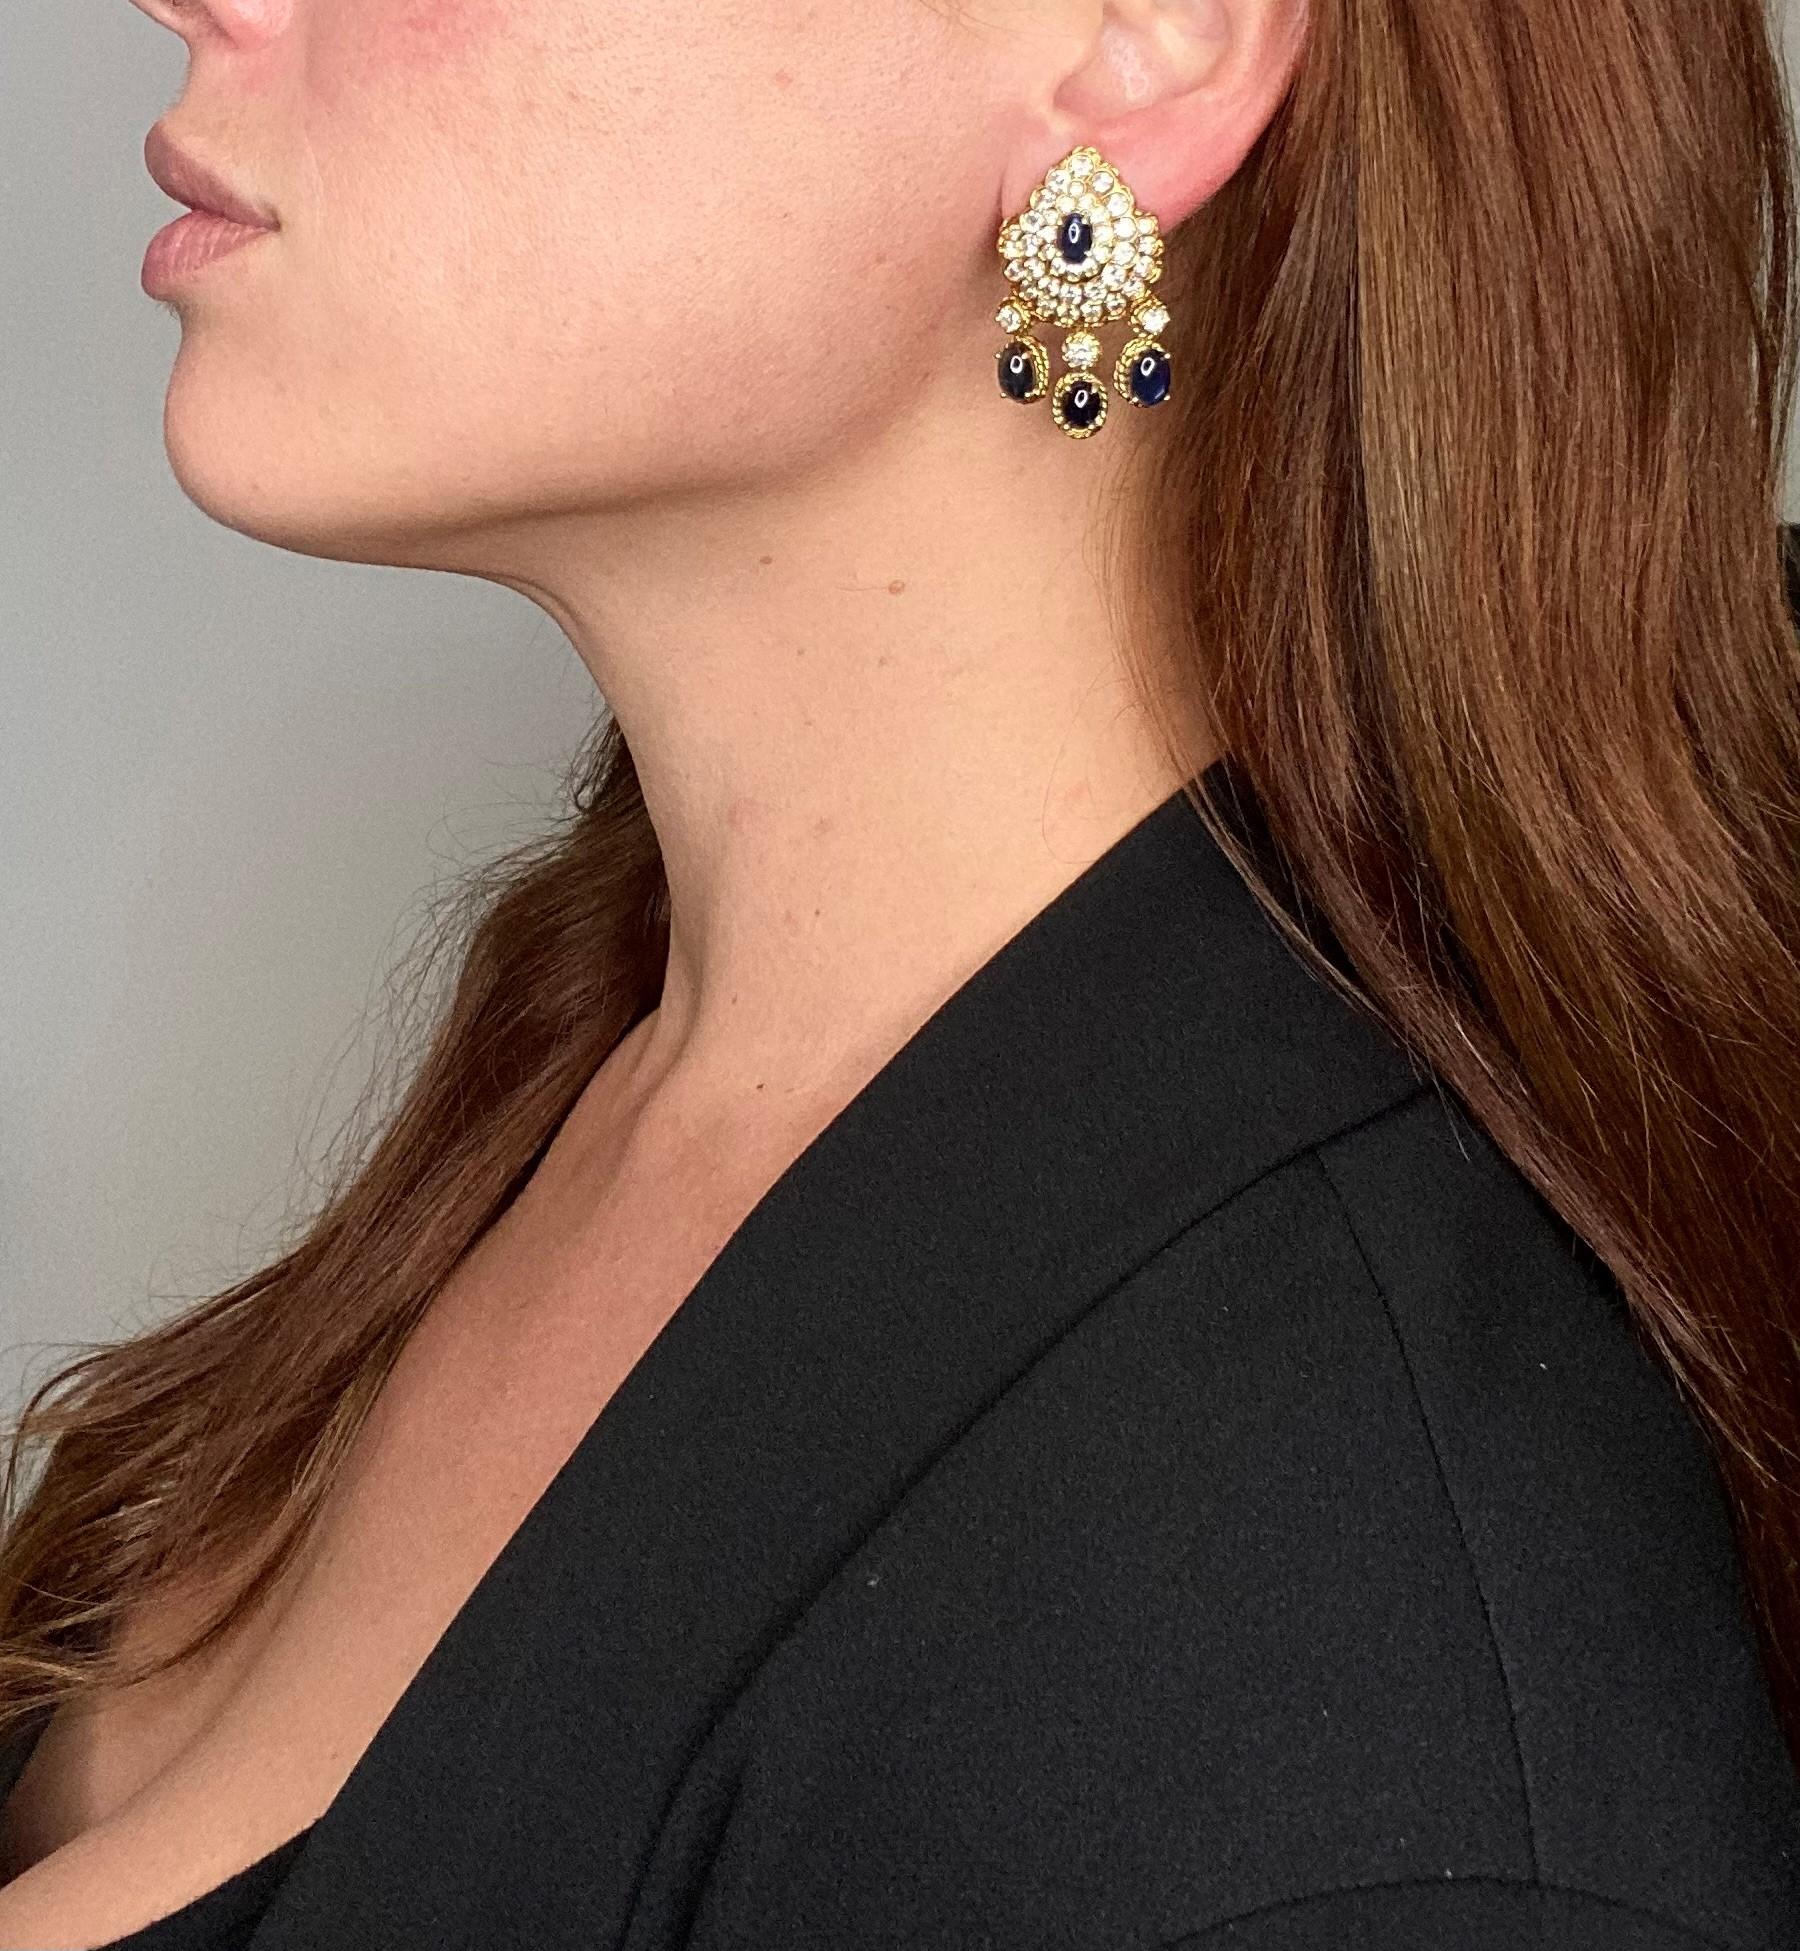 Statement cluster earrings designed by Tadini.

Exceptional pieces with great look, created by the jewelry house of Tanini, back in the 1970's. These pair of dangle cluster earrings has been carefully crafted in solid yellow gold of 18 karats and